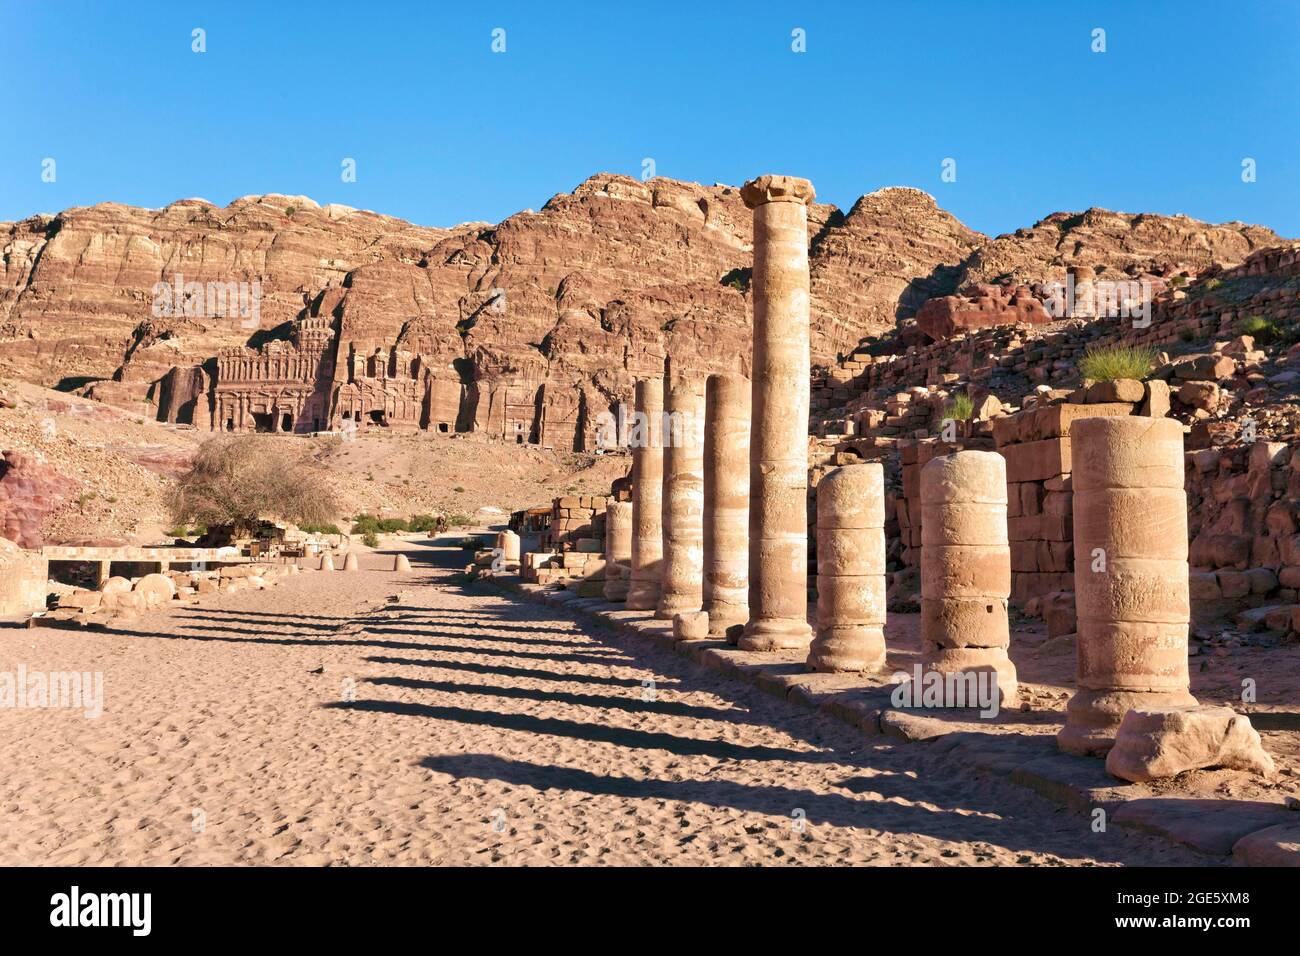 Columns on Colonnade Street, in the back Royal Tombs on the western slope of Jabal al-Khubtha, Petra, UNESCO World Heritage Site, Kingdom of Jordan Stock Photo